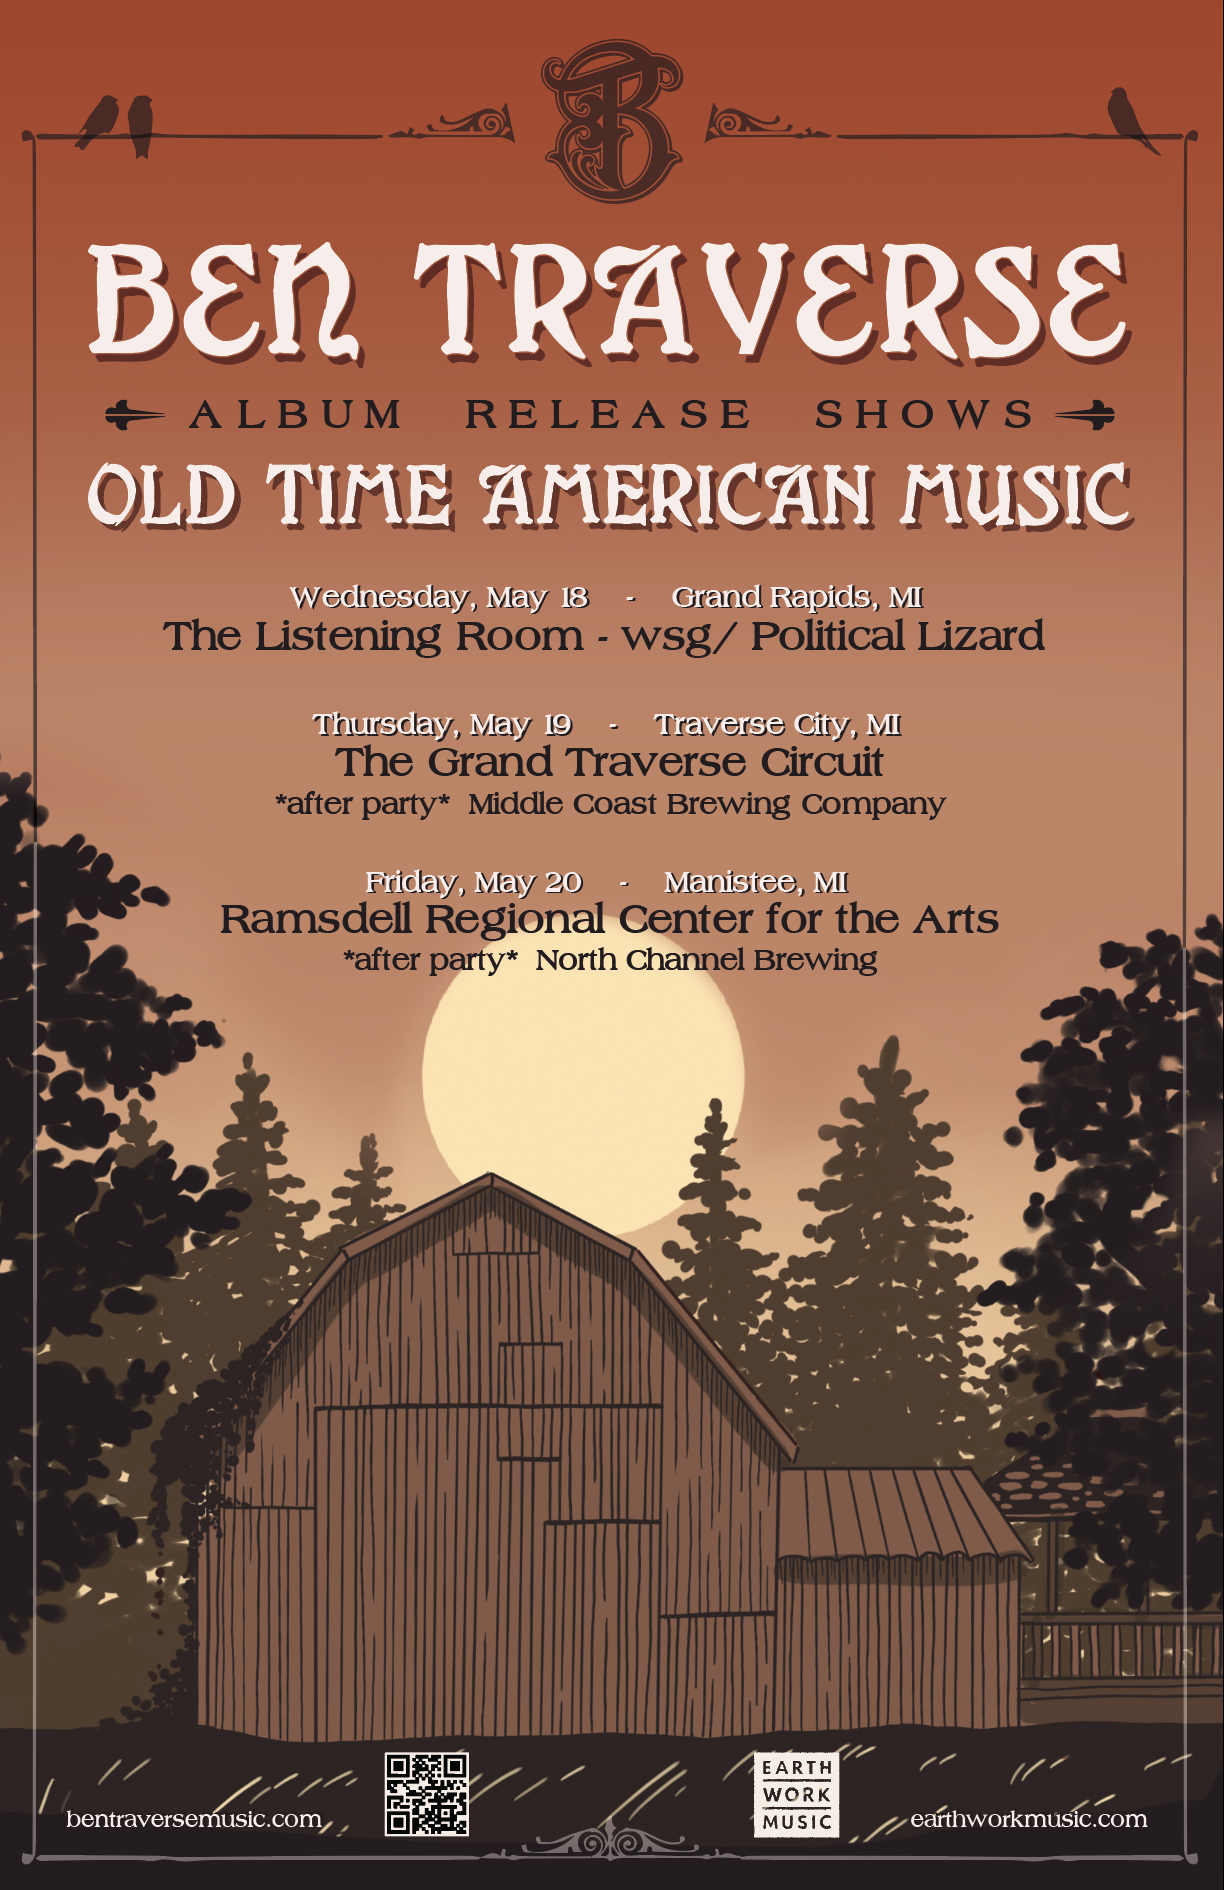 Poster for the Old Time American Music album release mini-tour.